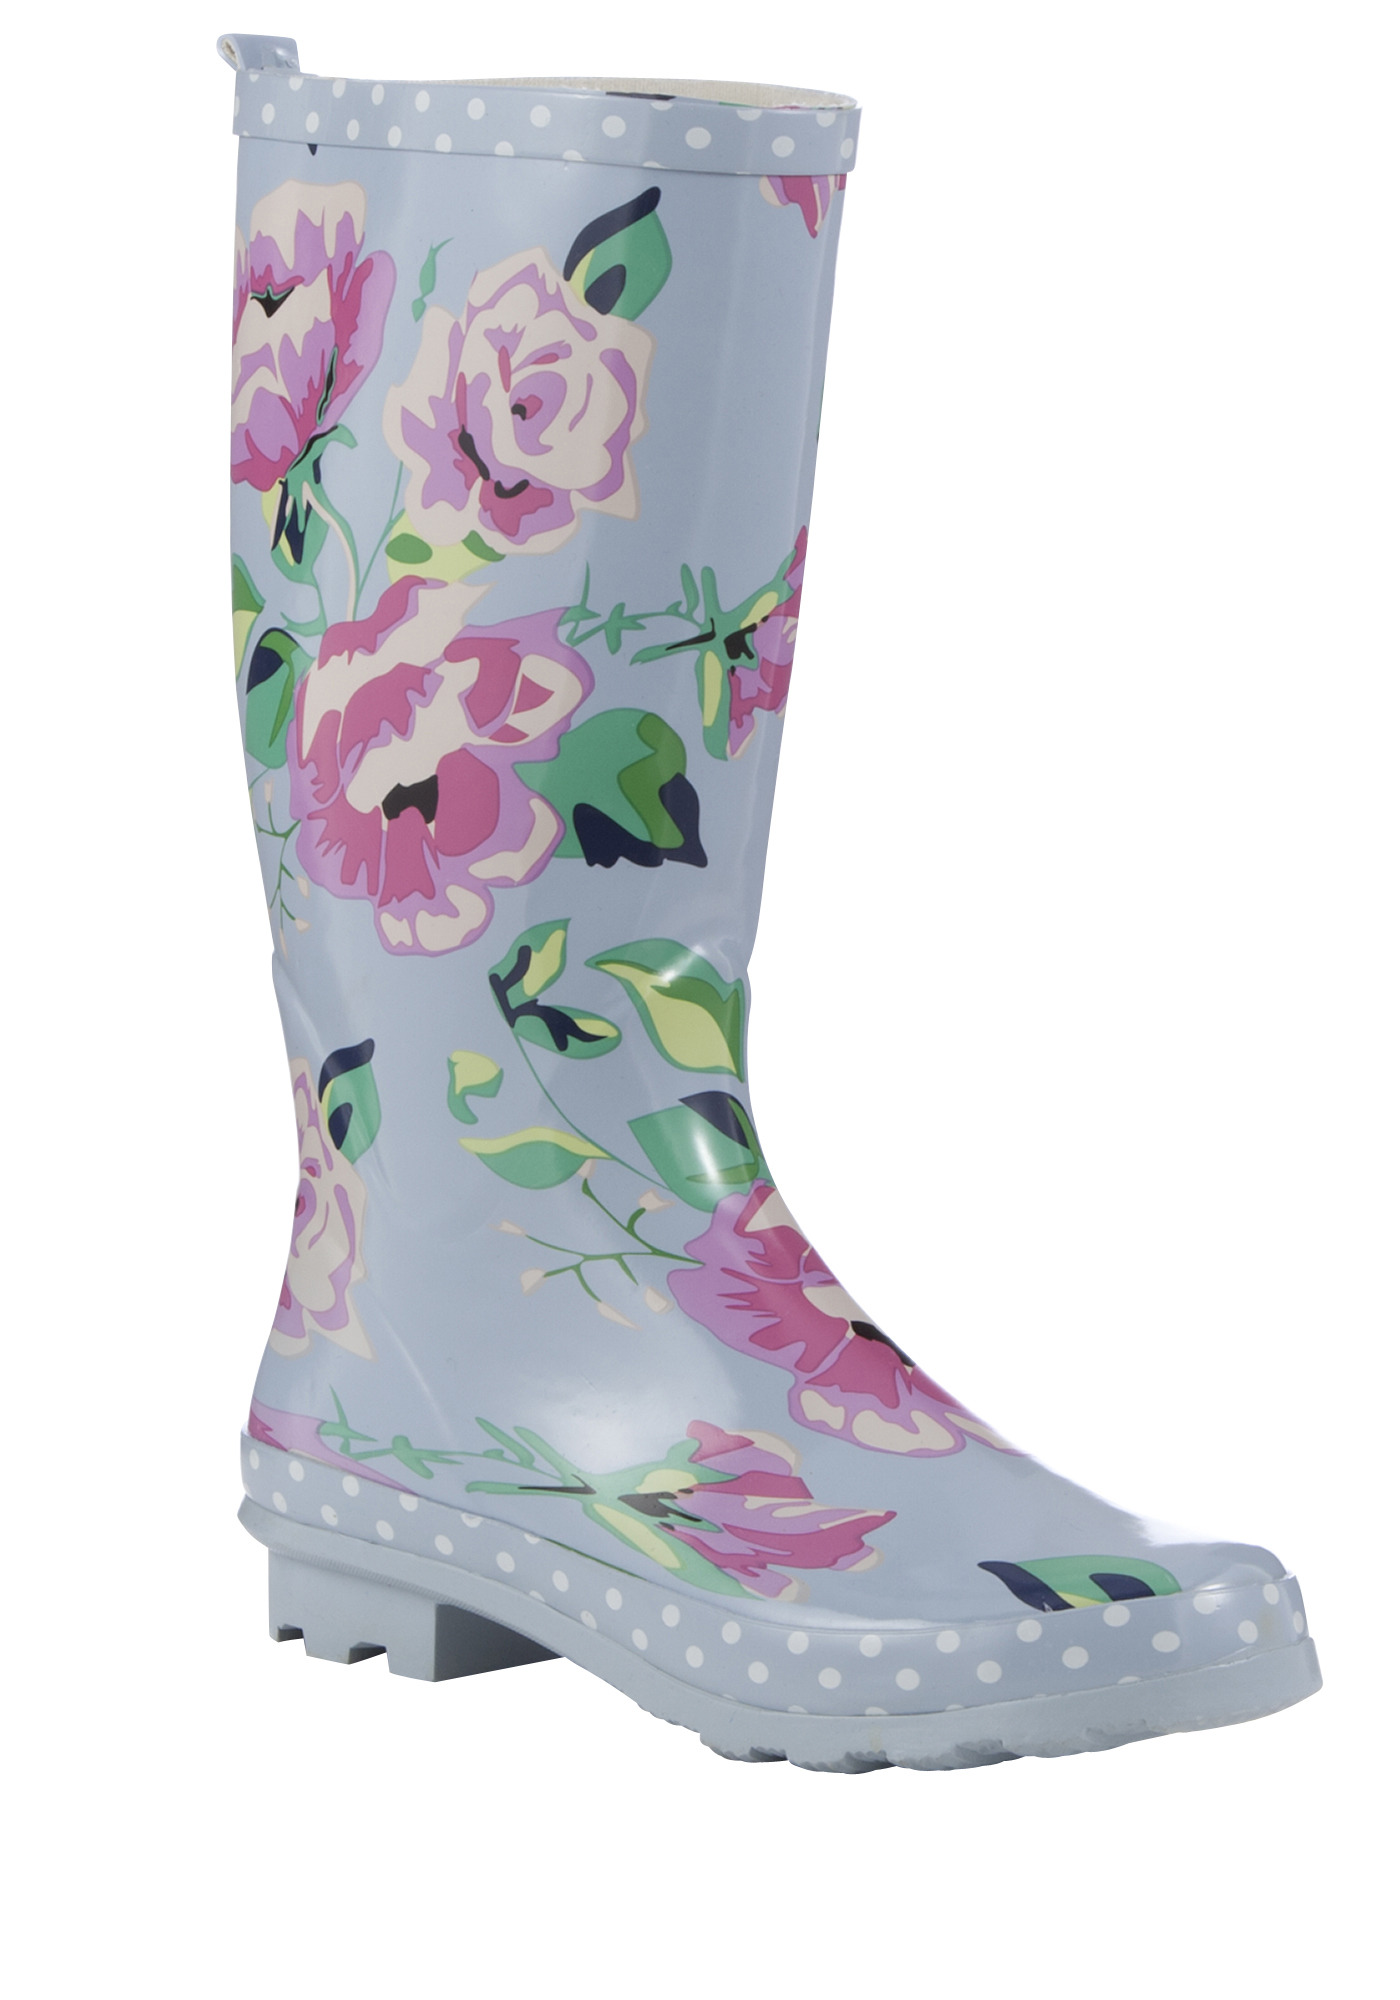 Wellies, 313, F\u0026F at Tesco – Styletto Mag